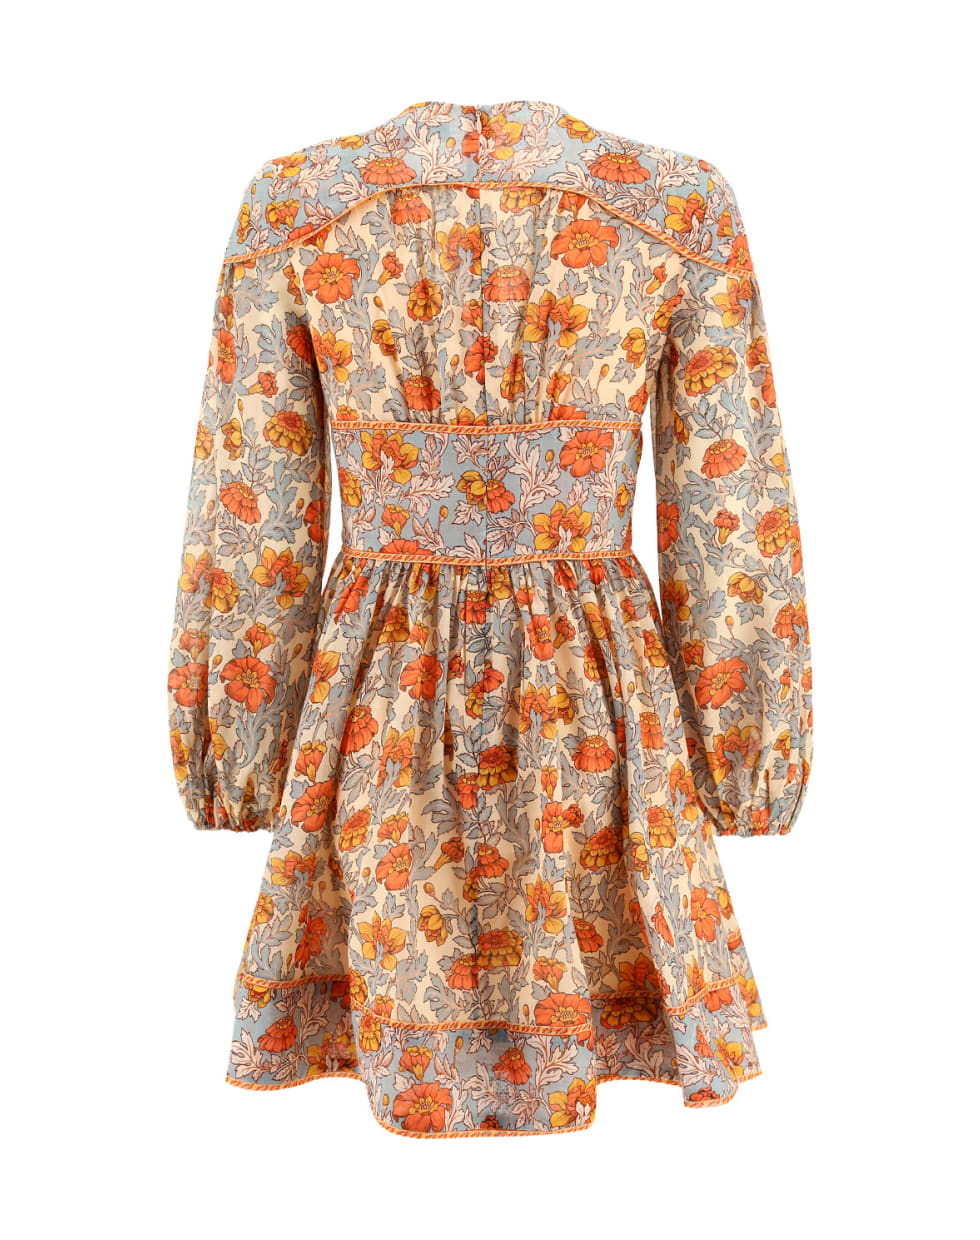 Zimmermann Andie Buttoned Mini Dress - Dusty blue floral